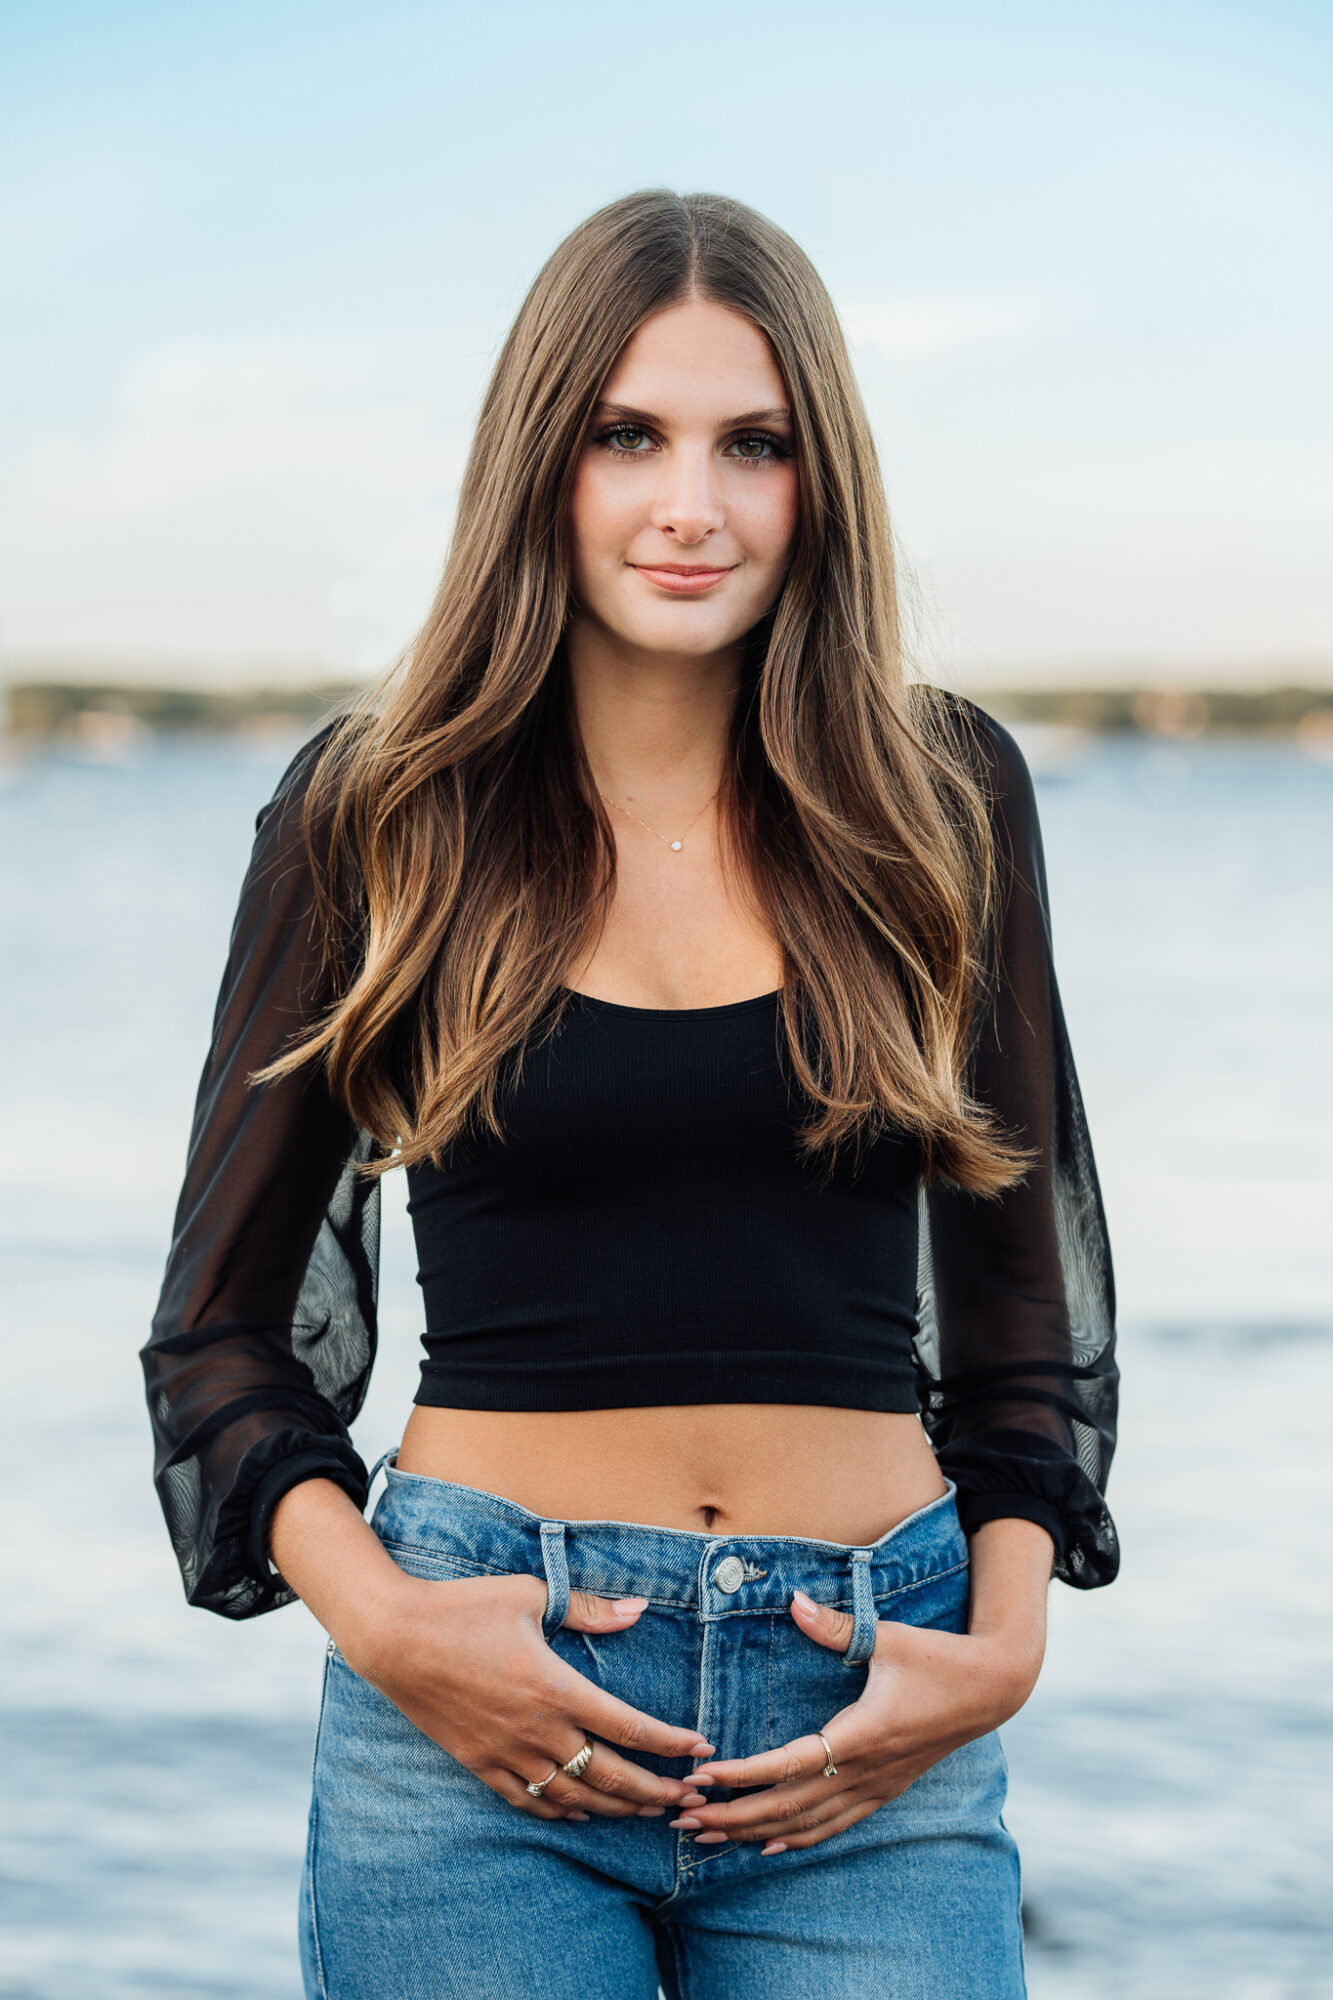 high school senior girl with long brown hair wearing black shirt and jeans by ocean